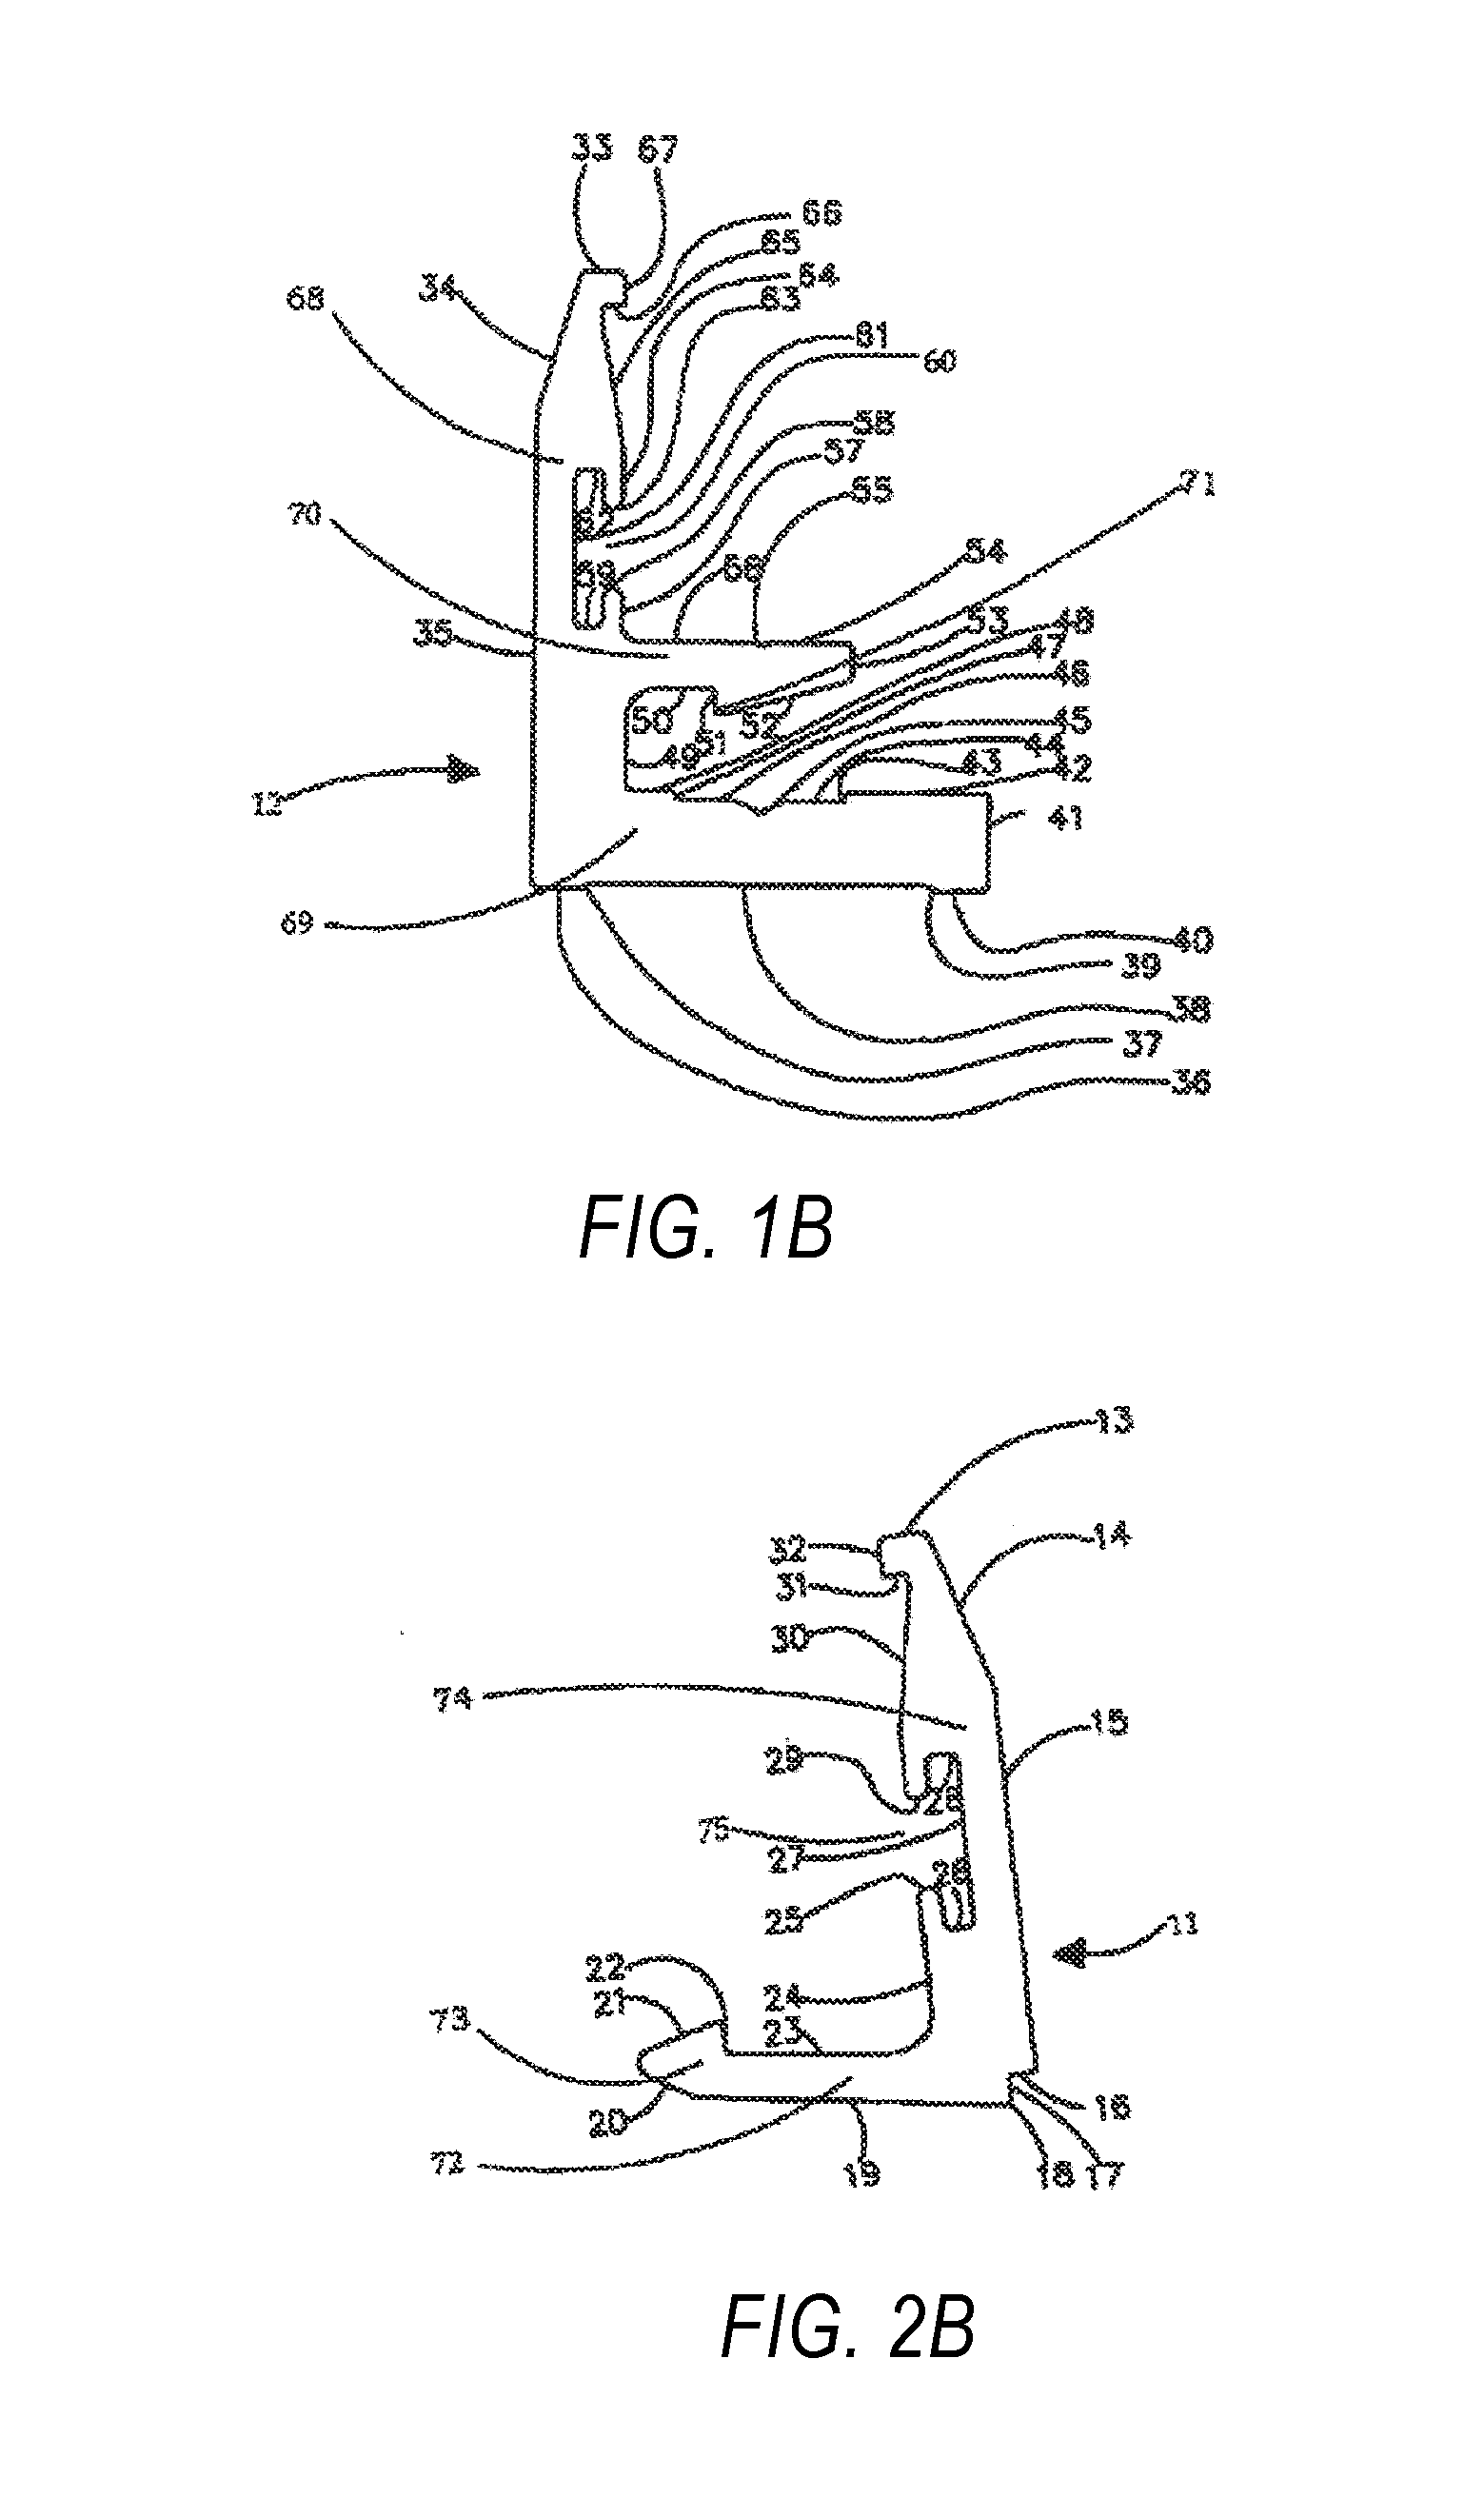 Glazing system with thermal break